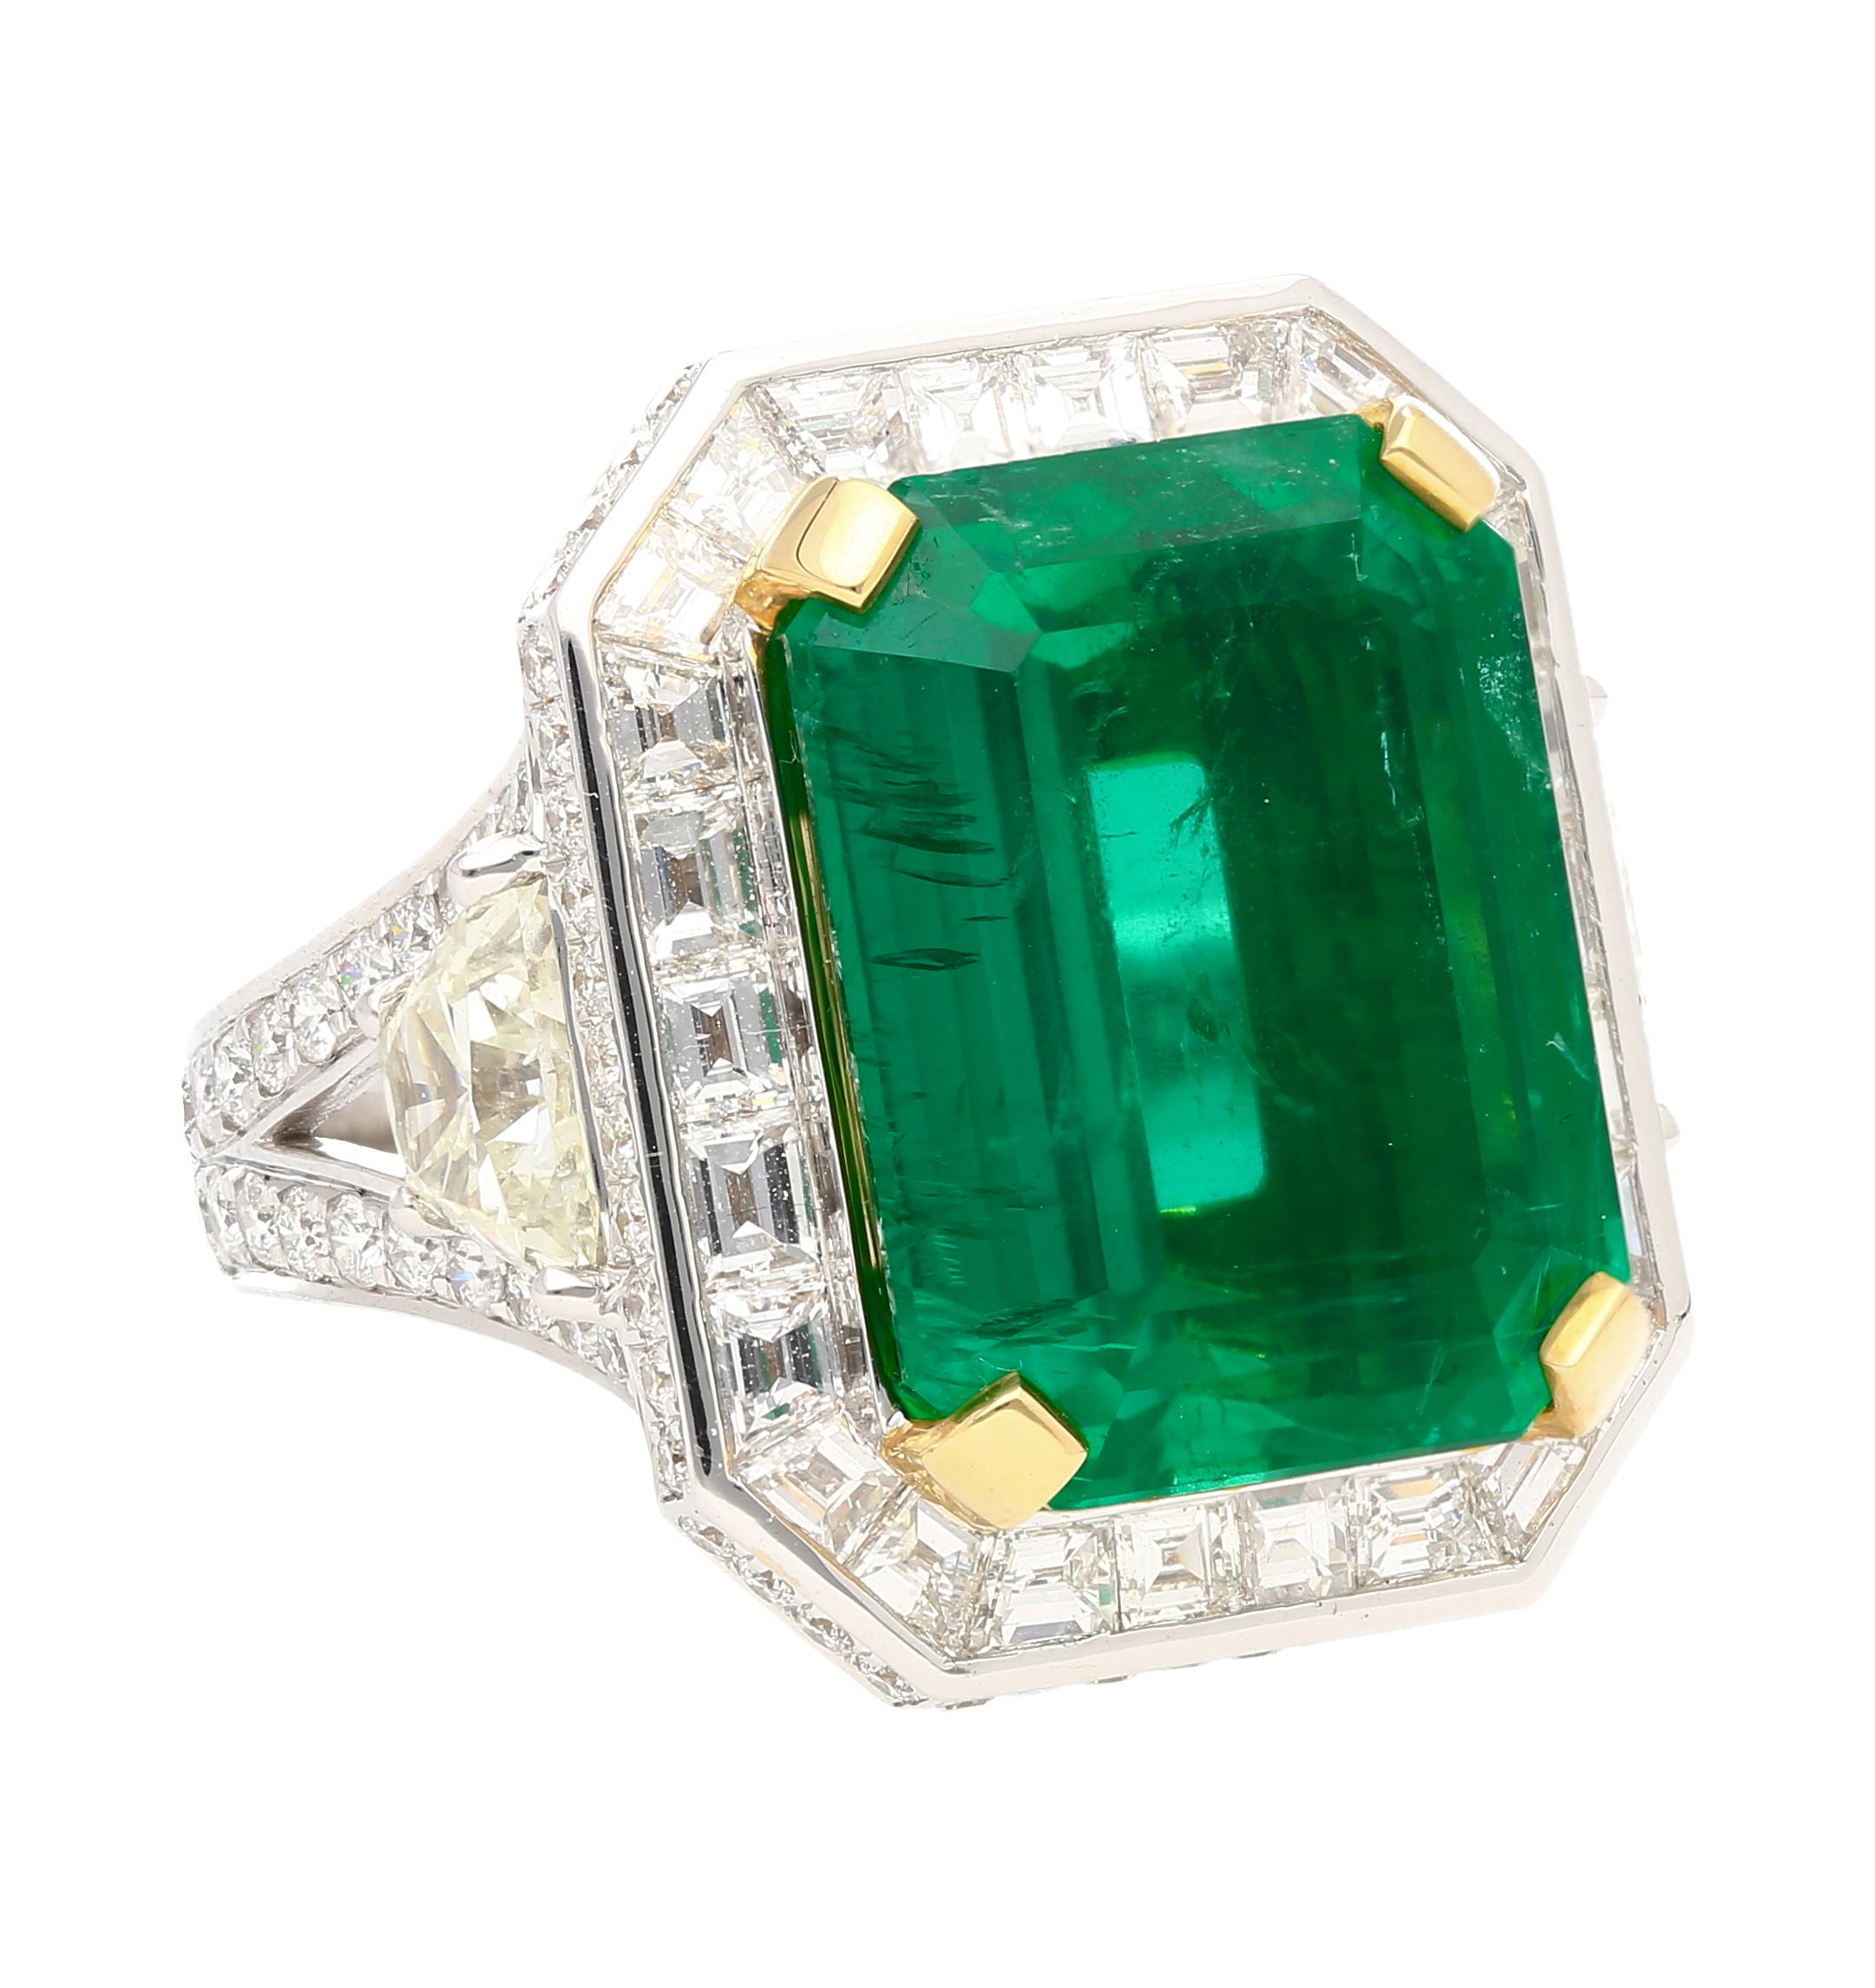 18 karat white gold emerald and diamond ring. Set with over 20 carats in natural emerald diamonds. 

The center stone emerald bears an incredible green color profile. A rich, vibrant green hue with excellent transparency and luster. A substantial